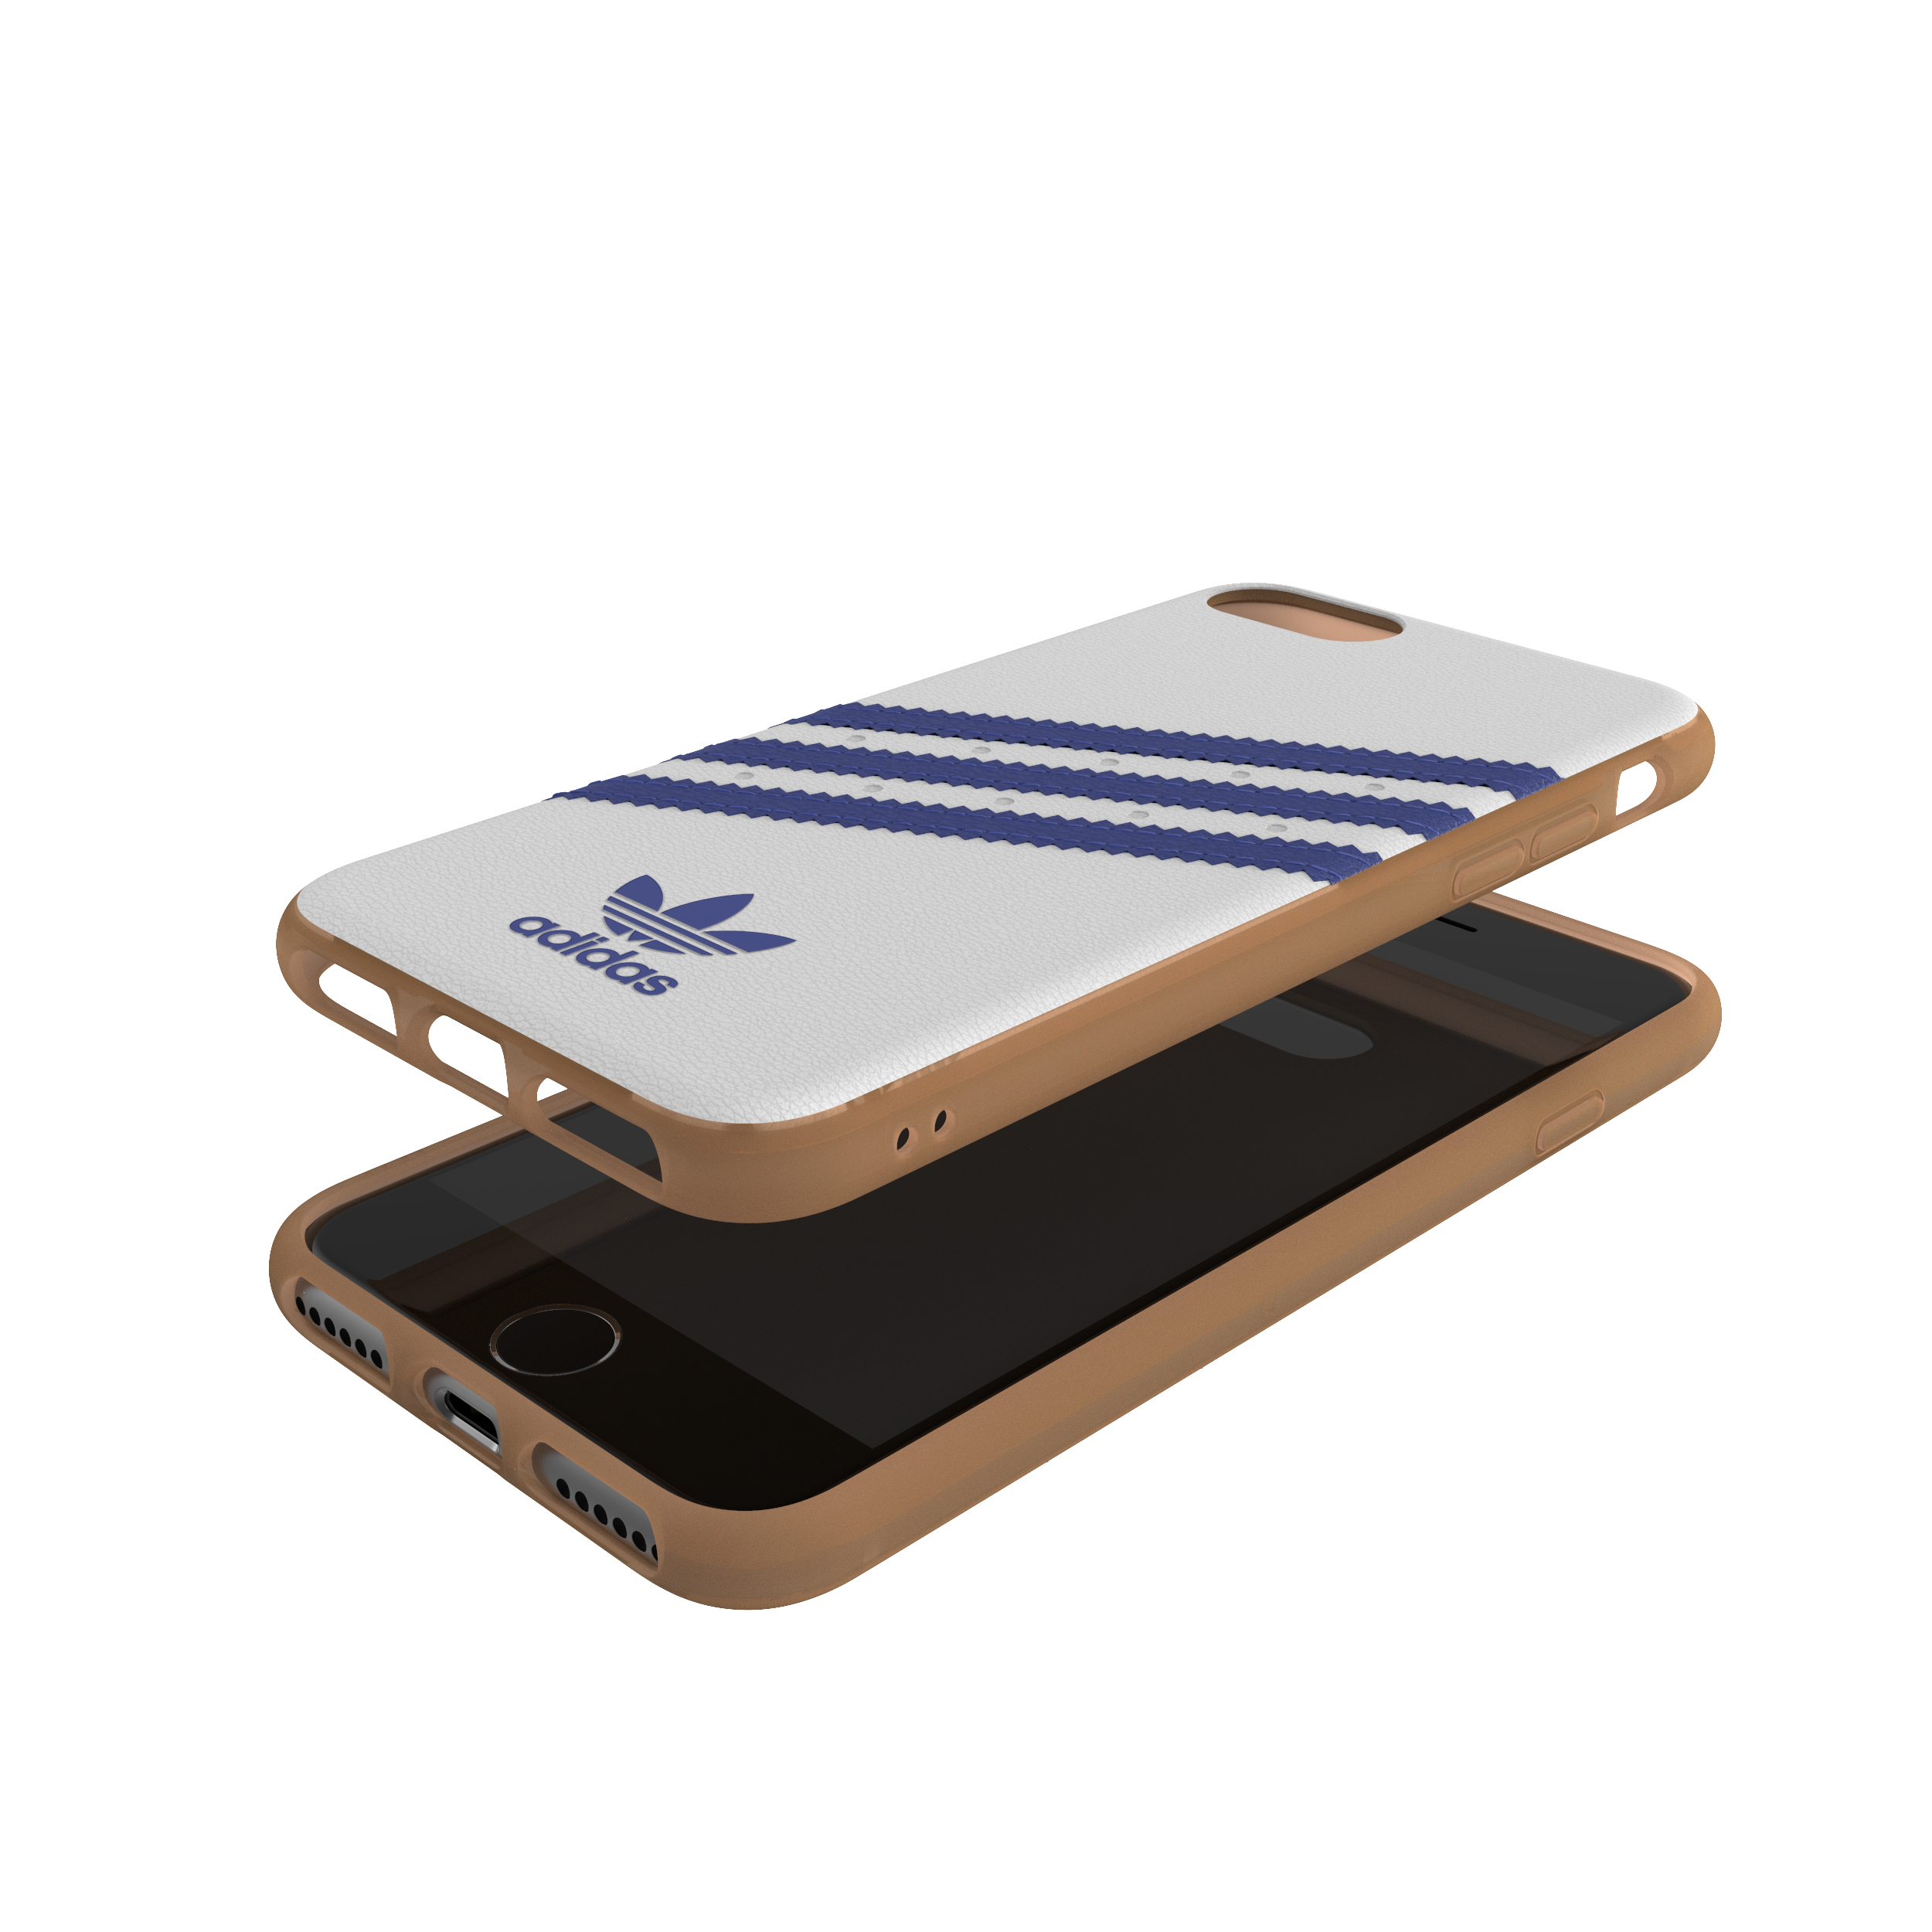 Moulded iPhone iPhone 6, Apple, OR ADIDAS Backcover, SE 8, (2020), Case, iPhone ORIGINALS iPhone Weiß/Blau 7,